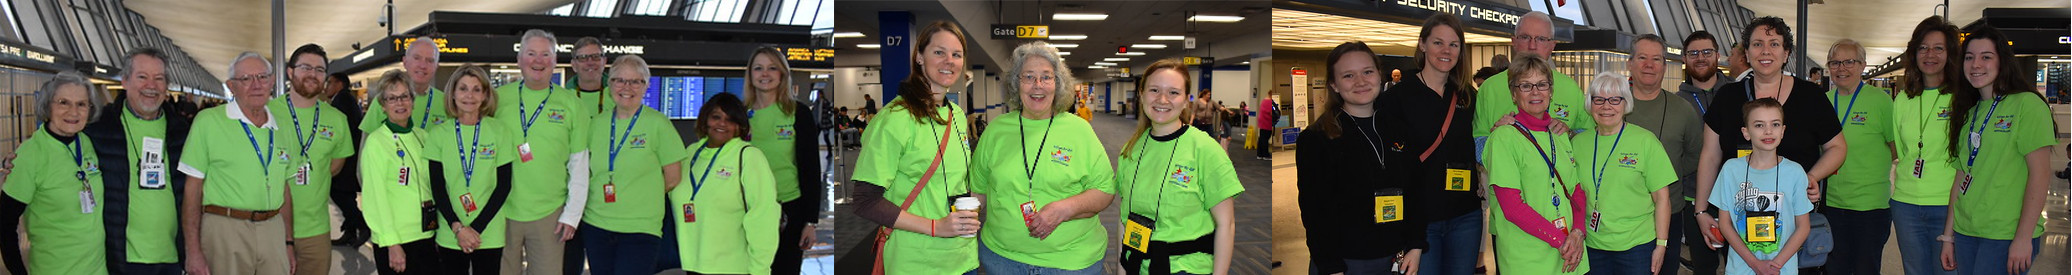 strip of 3 photos of volunteer groups working a wings for all event at dulles airport